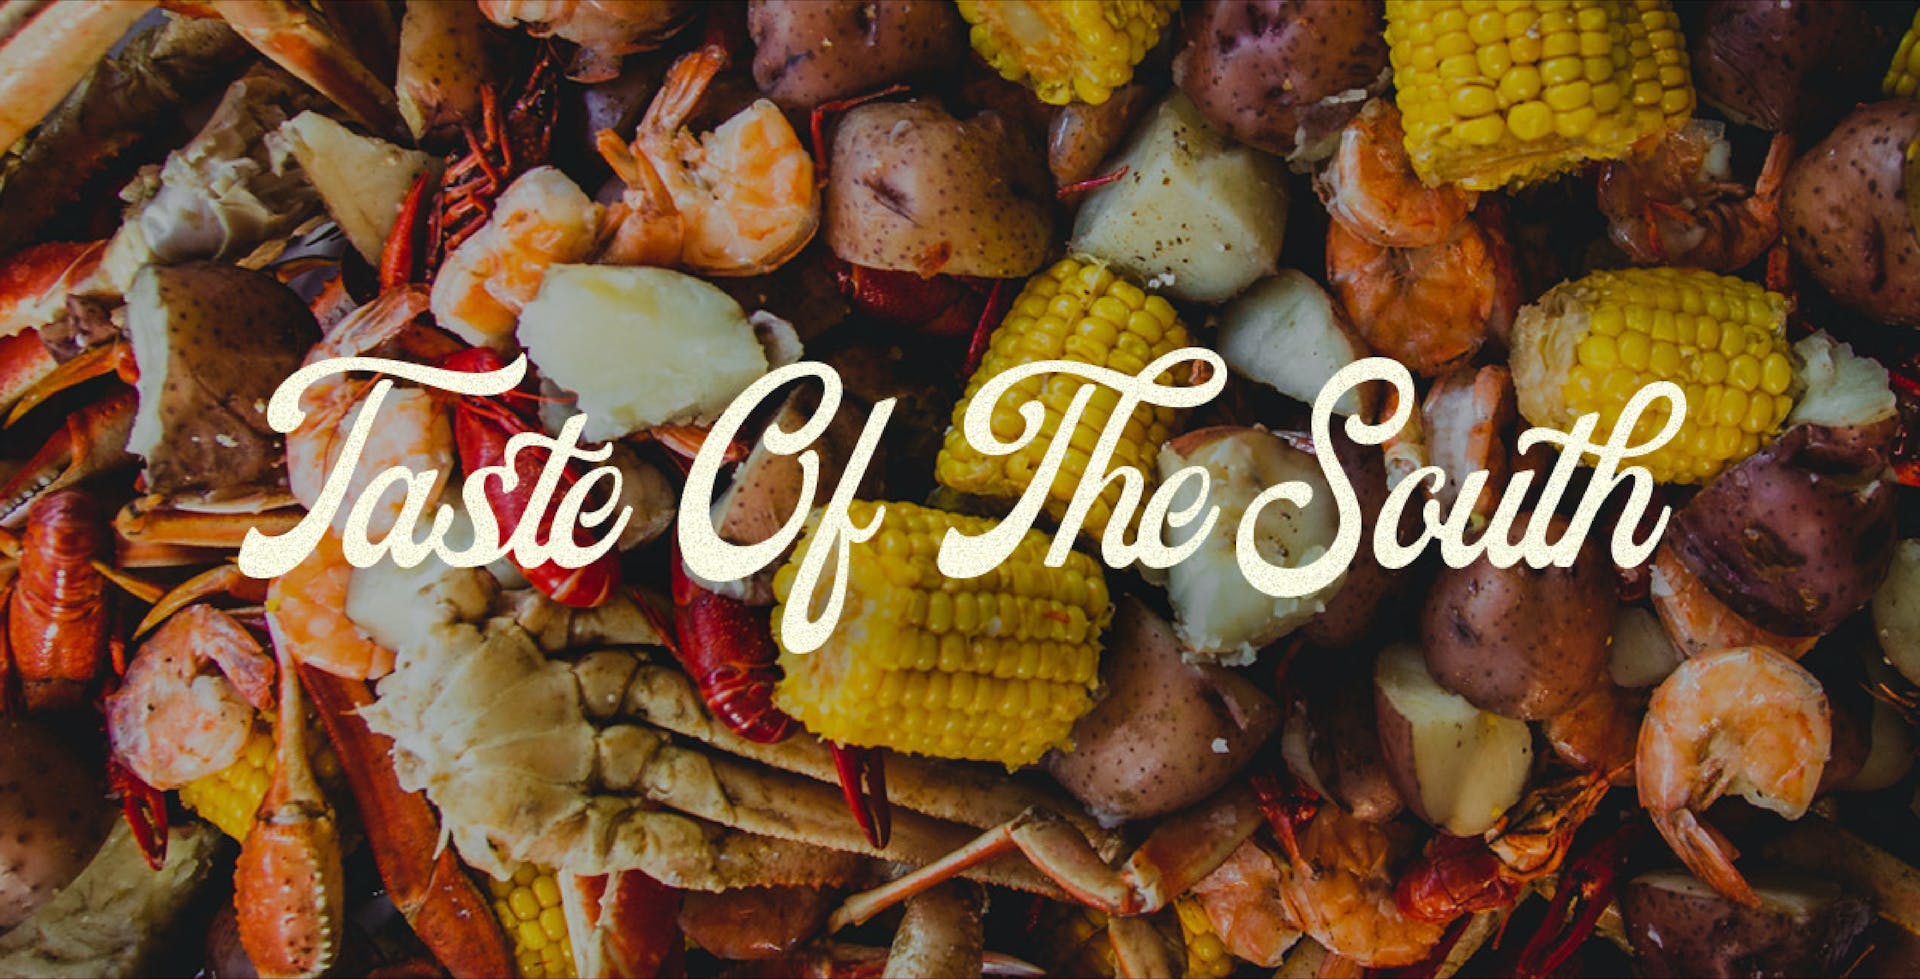 Taste Of The South